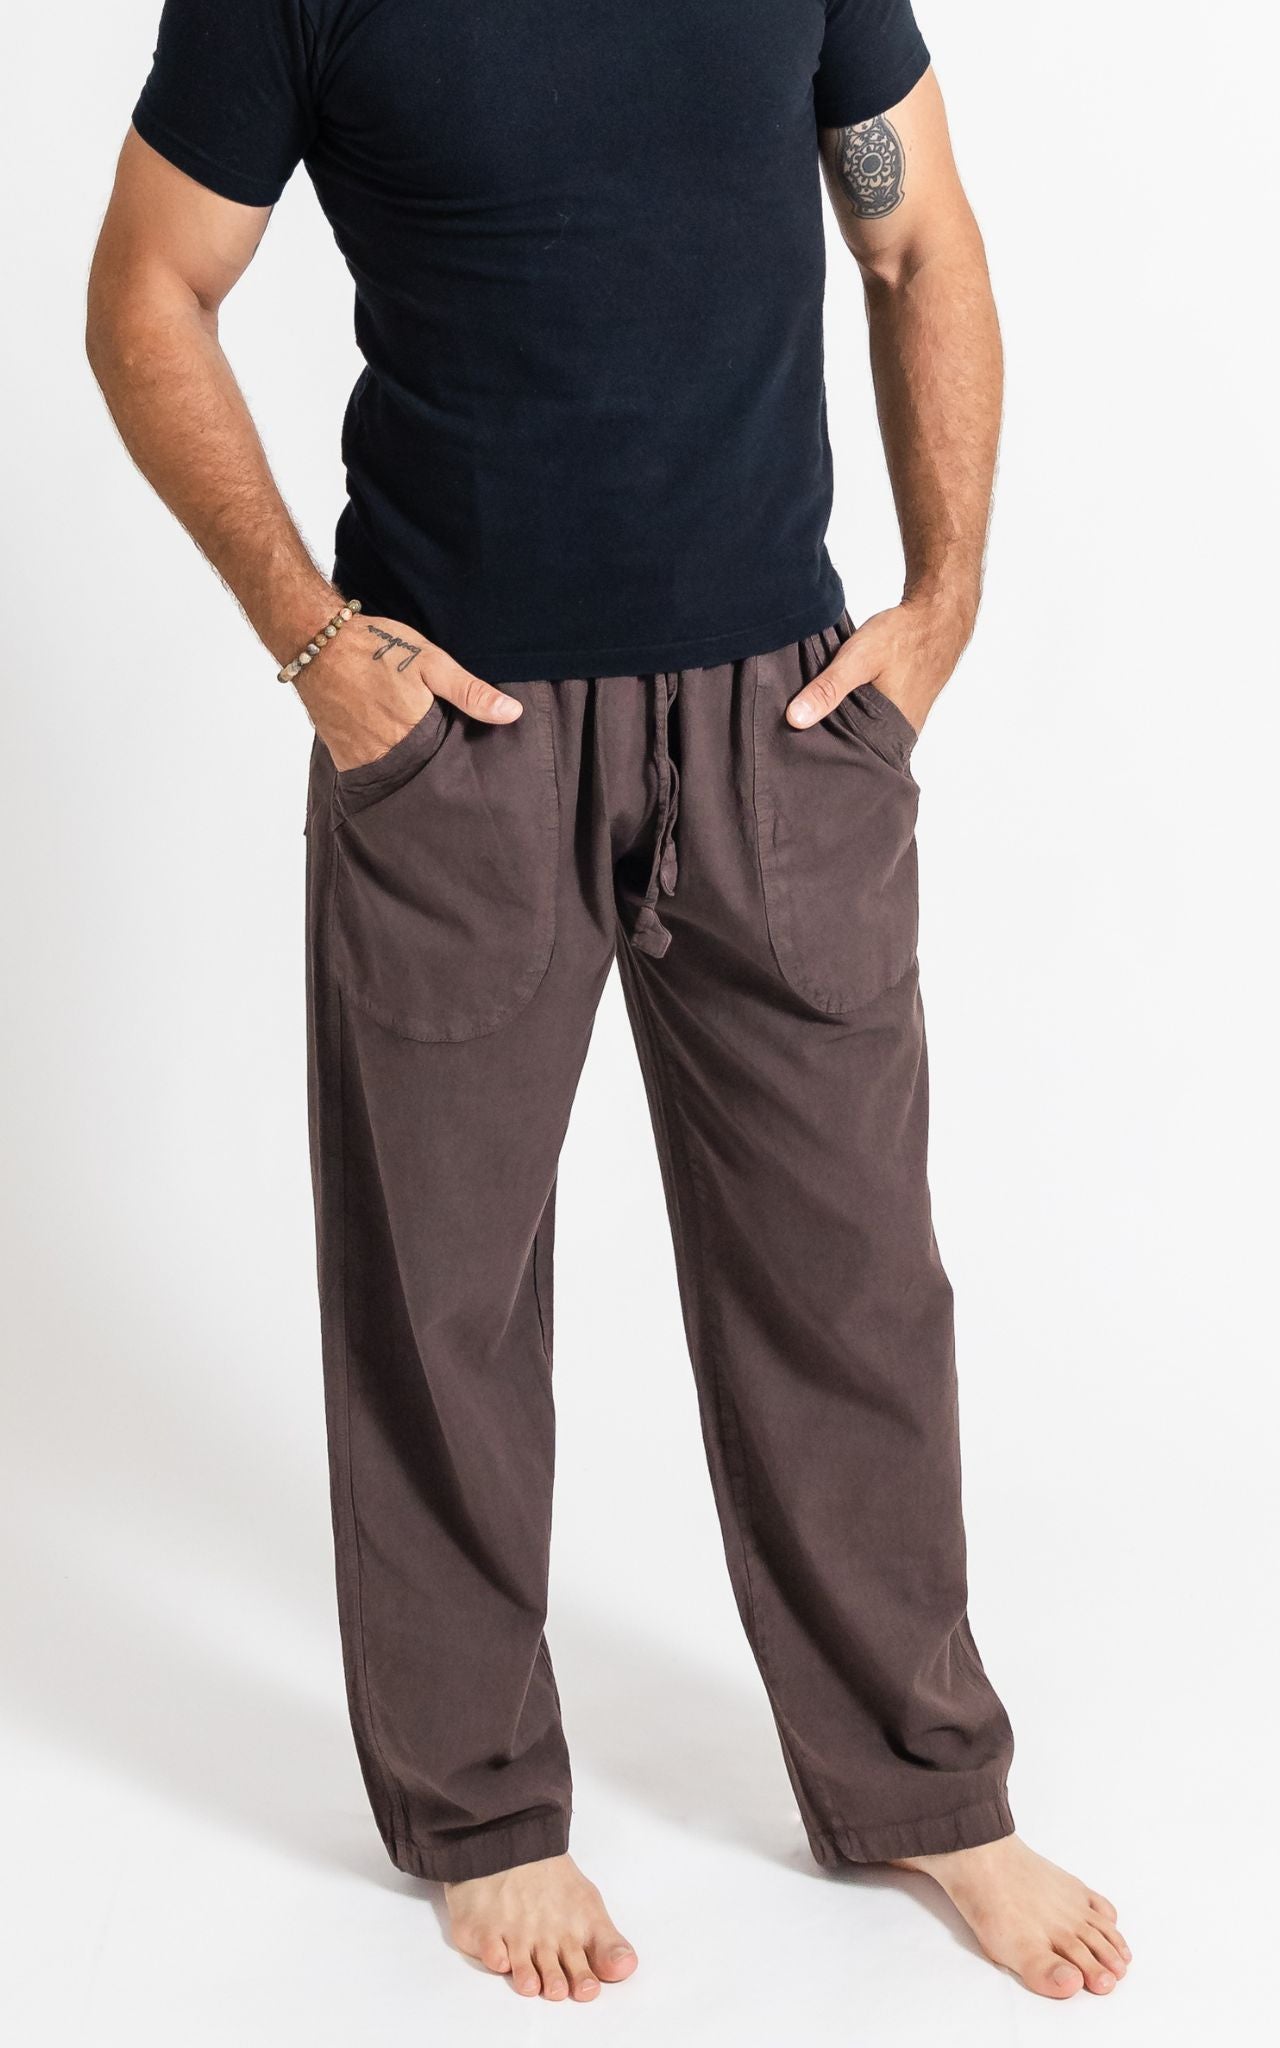 Surya Australia Ethical Plain Cotton 'Jerome' pants for men made in Nepal